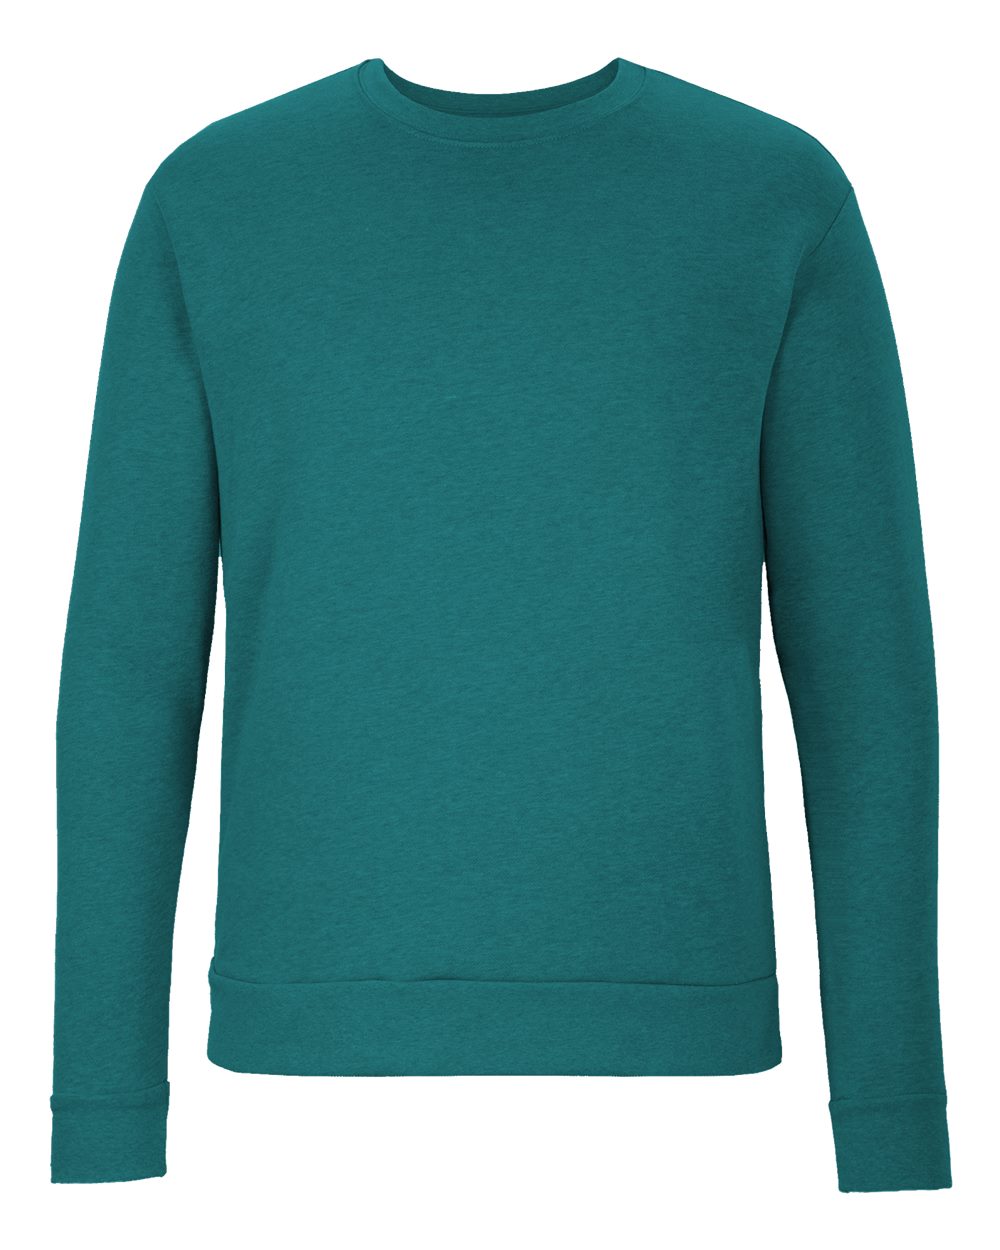 The Best (Actually Stylish) Sweatshirts for Under $60